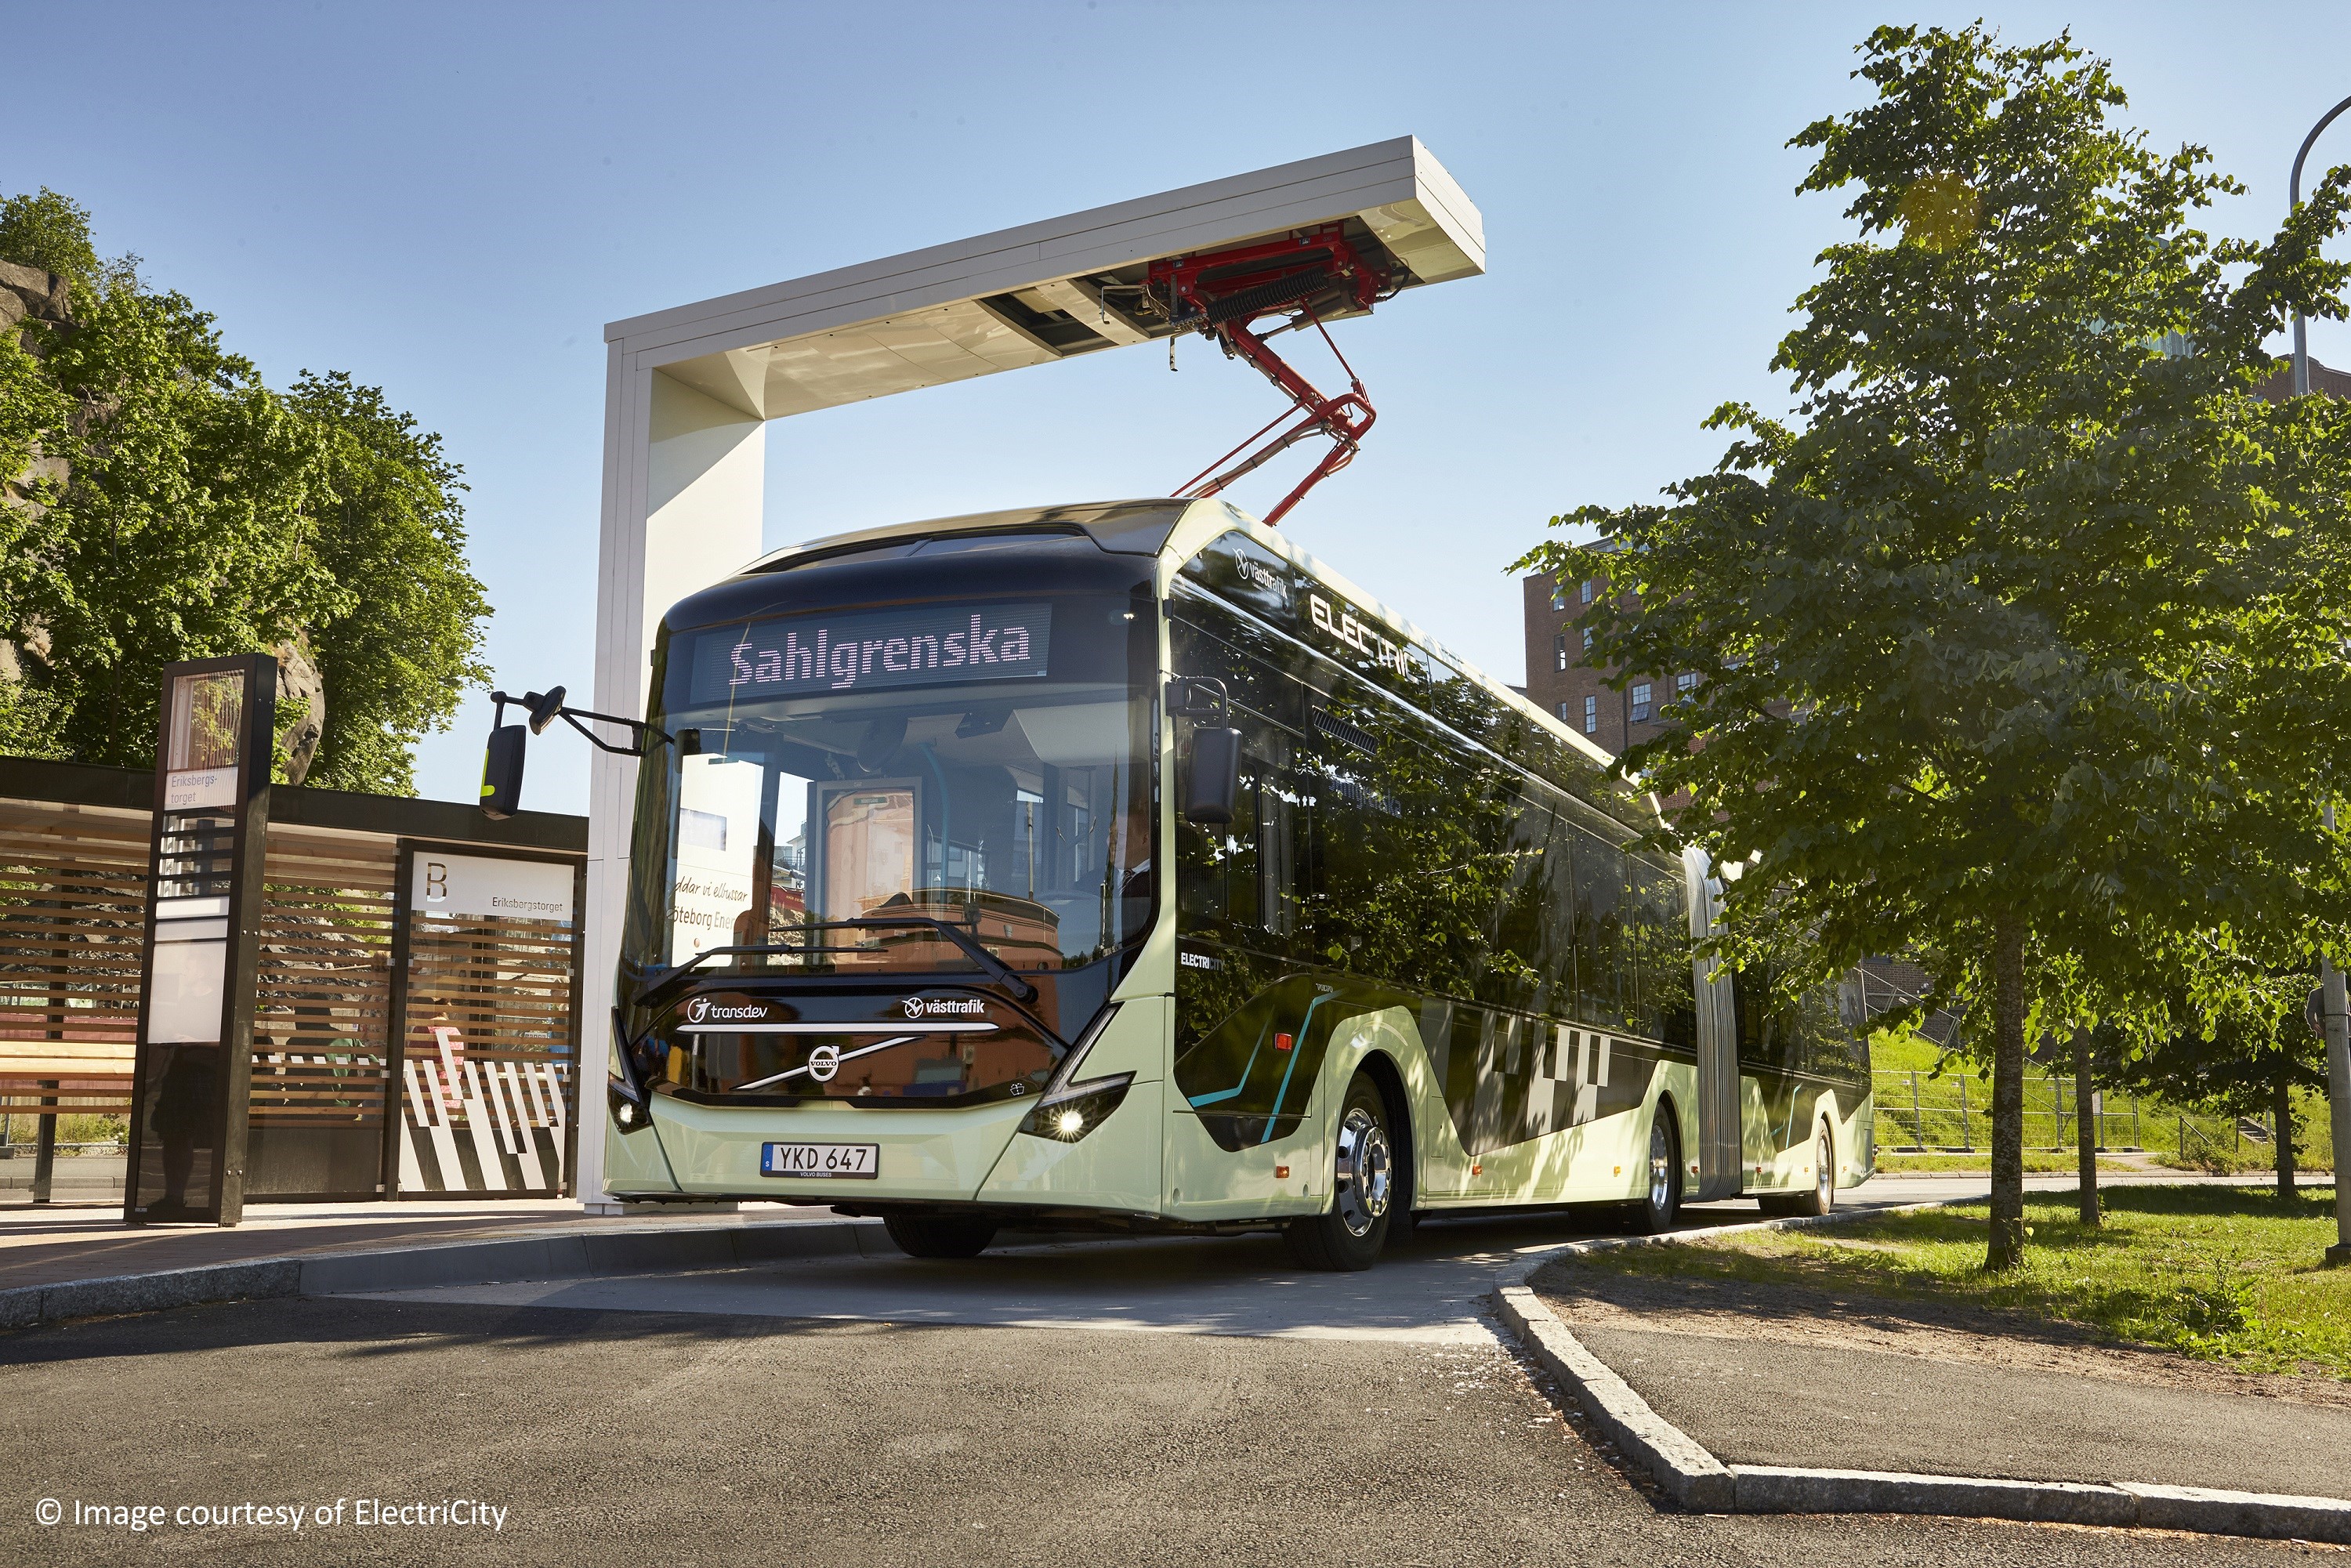 Volvo and ABB to electrify Gothenburg city streets (Source: Image courtesy of ElectriCity)